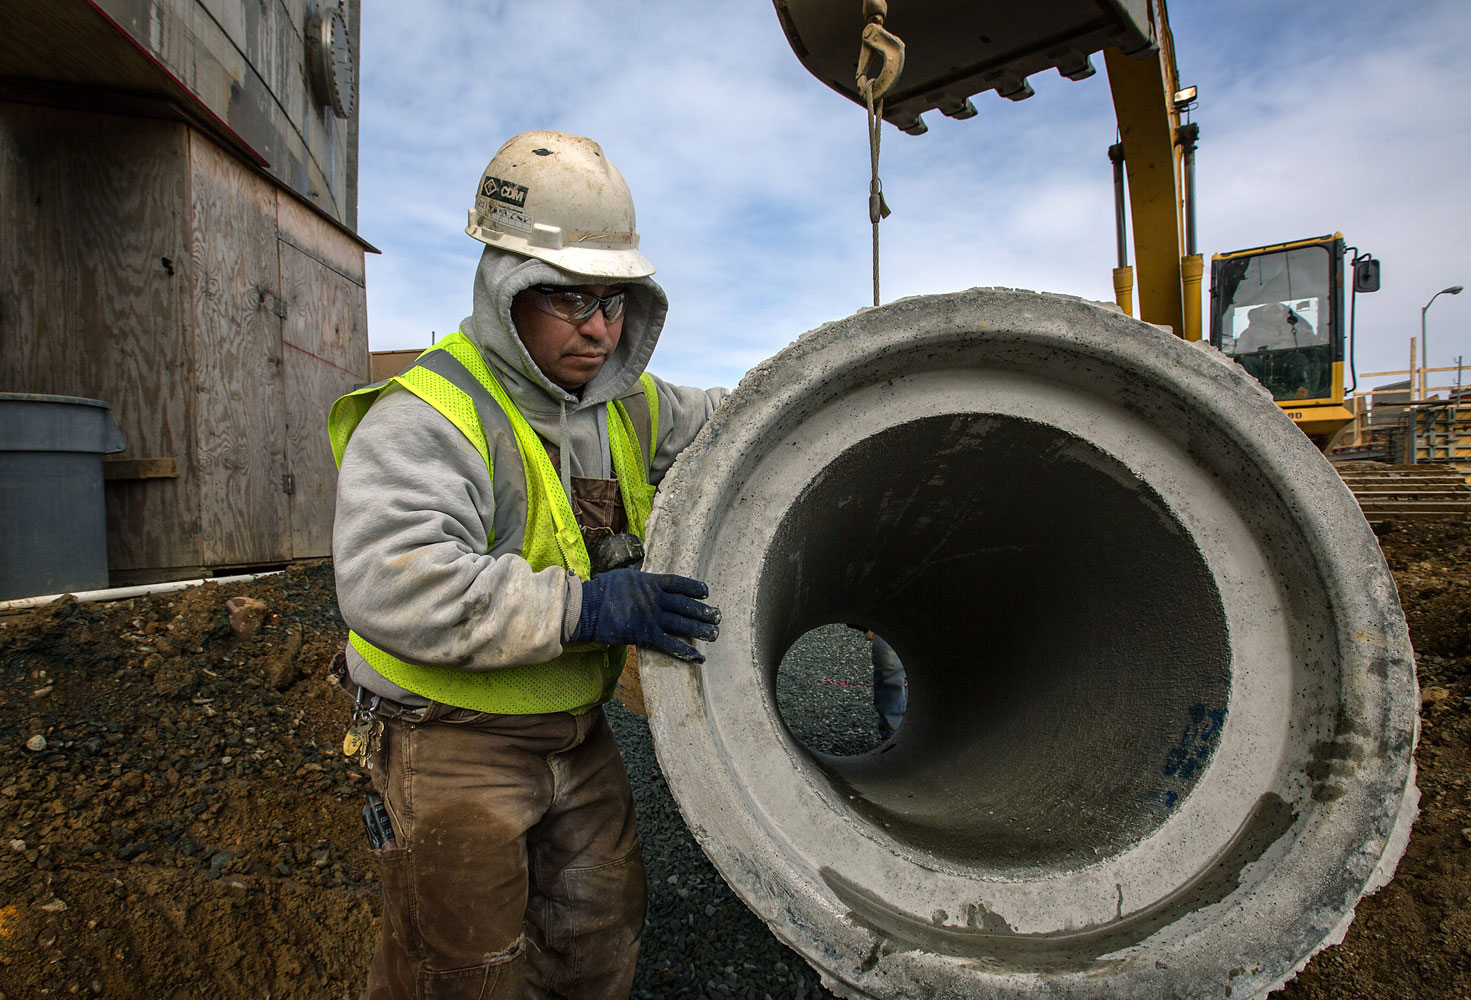 Construction worker installs storm water drain pipes at a hydrolysis wastewater treatment project in Washington, D.C., March 18, 2014. (Evelyn Hockstein—Polaris)